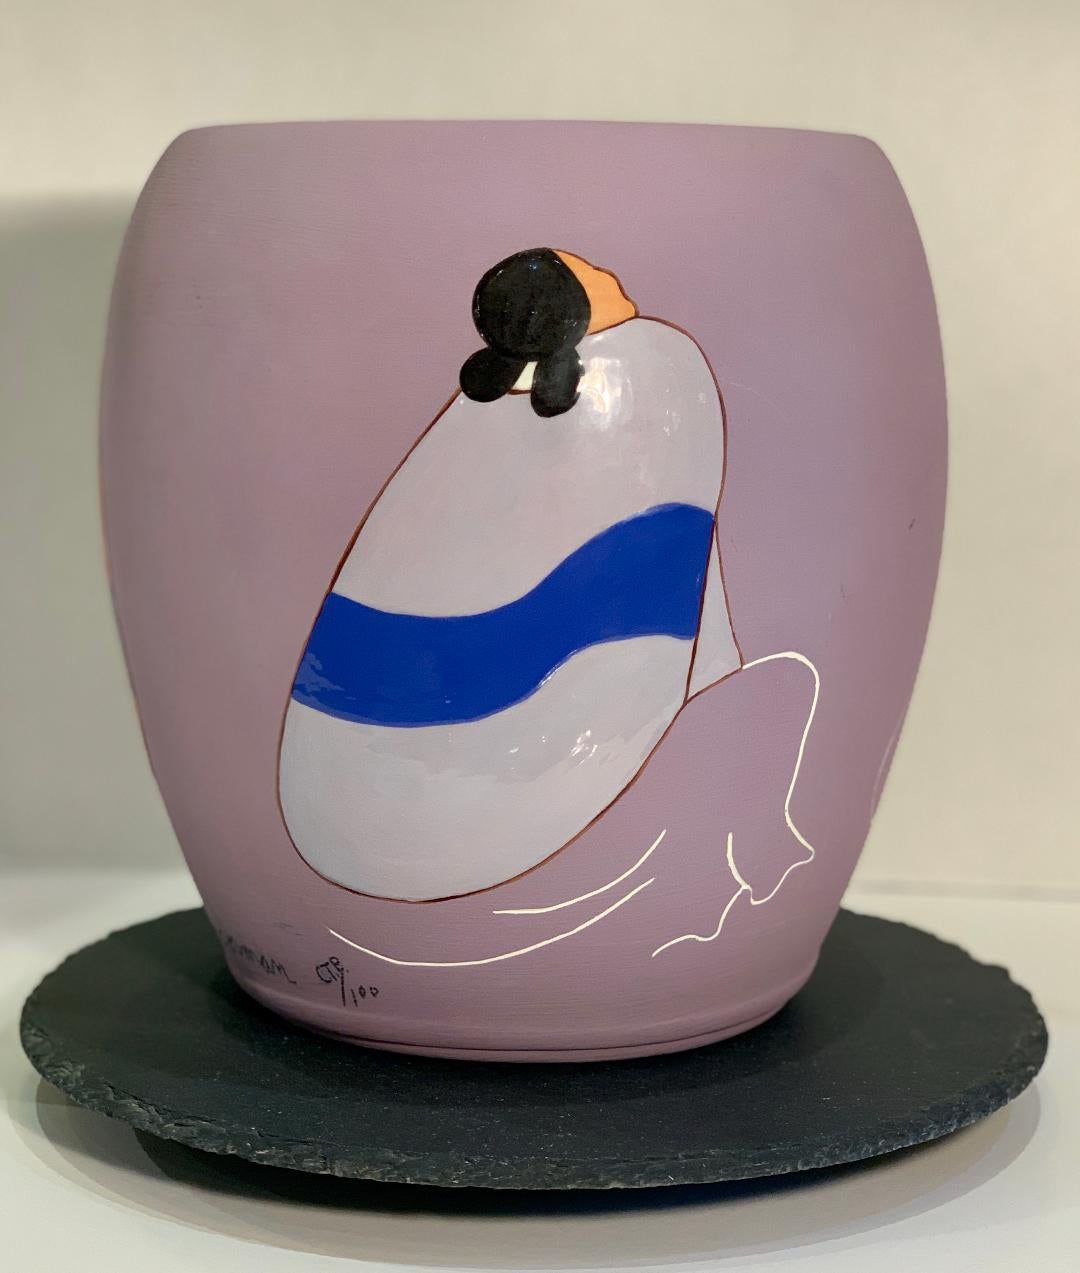 Original, rare, limited edition of only 100 in the world, handmade and hand painted bulbous ceramic vase with matte lilac exterior, features three seated Navajo women in vibrant polychrome glazed finish. The inside of the vase is dark purple glaze